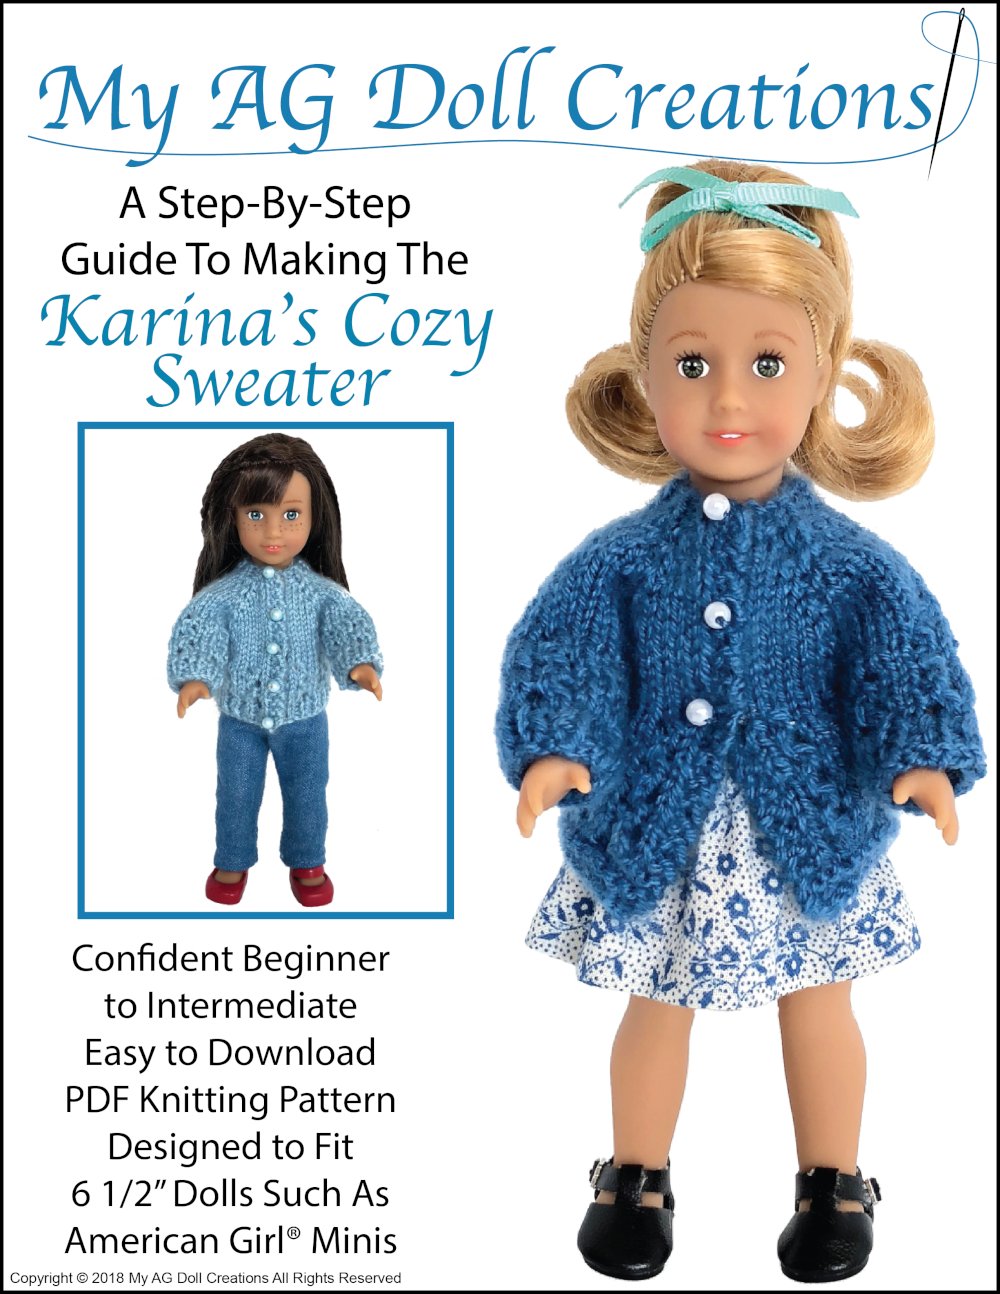 Knitting Pattern for Three Dresses for 18-inch dolls like American Girl,  Our Generation, Maplelea Girl and other similar dolls.